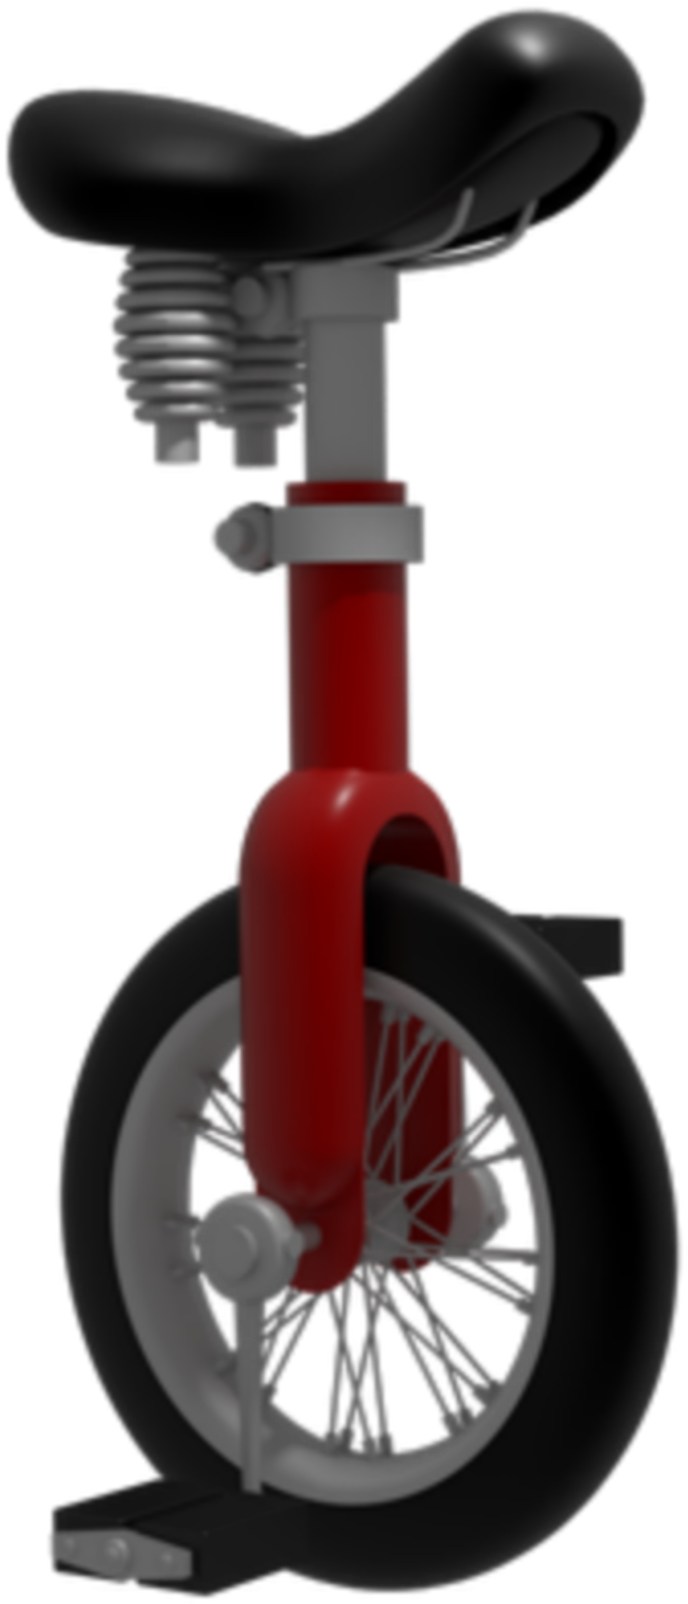 A Red And Black Wheel